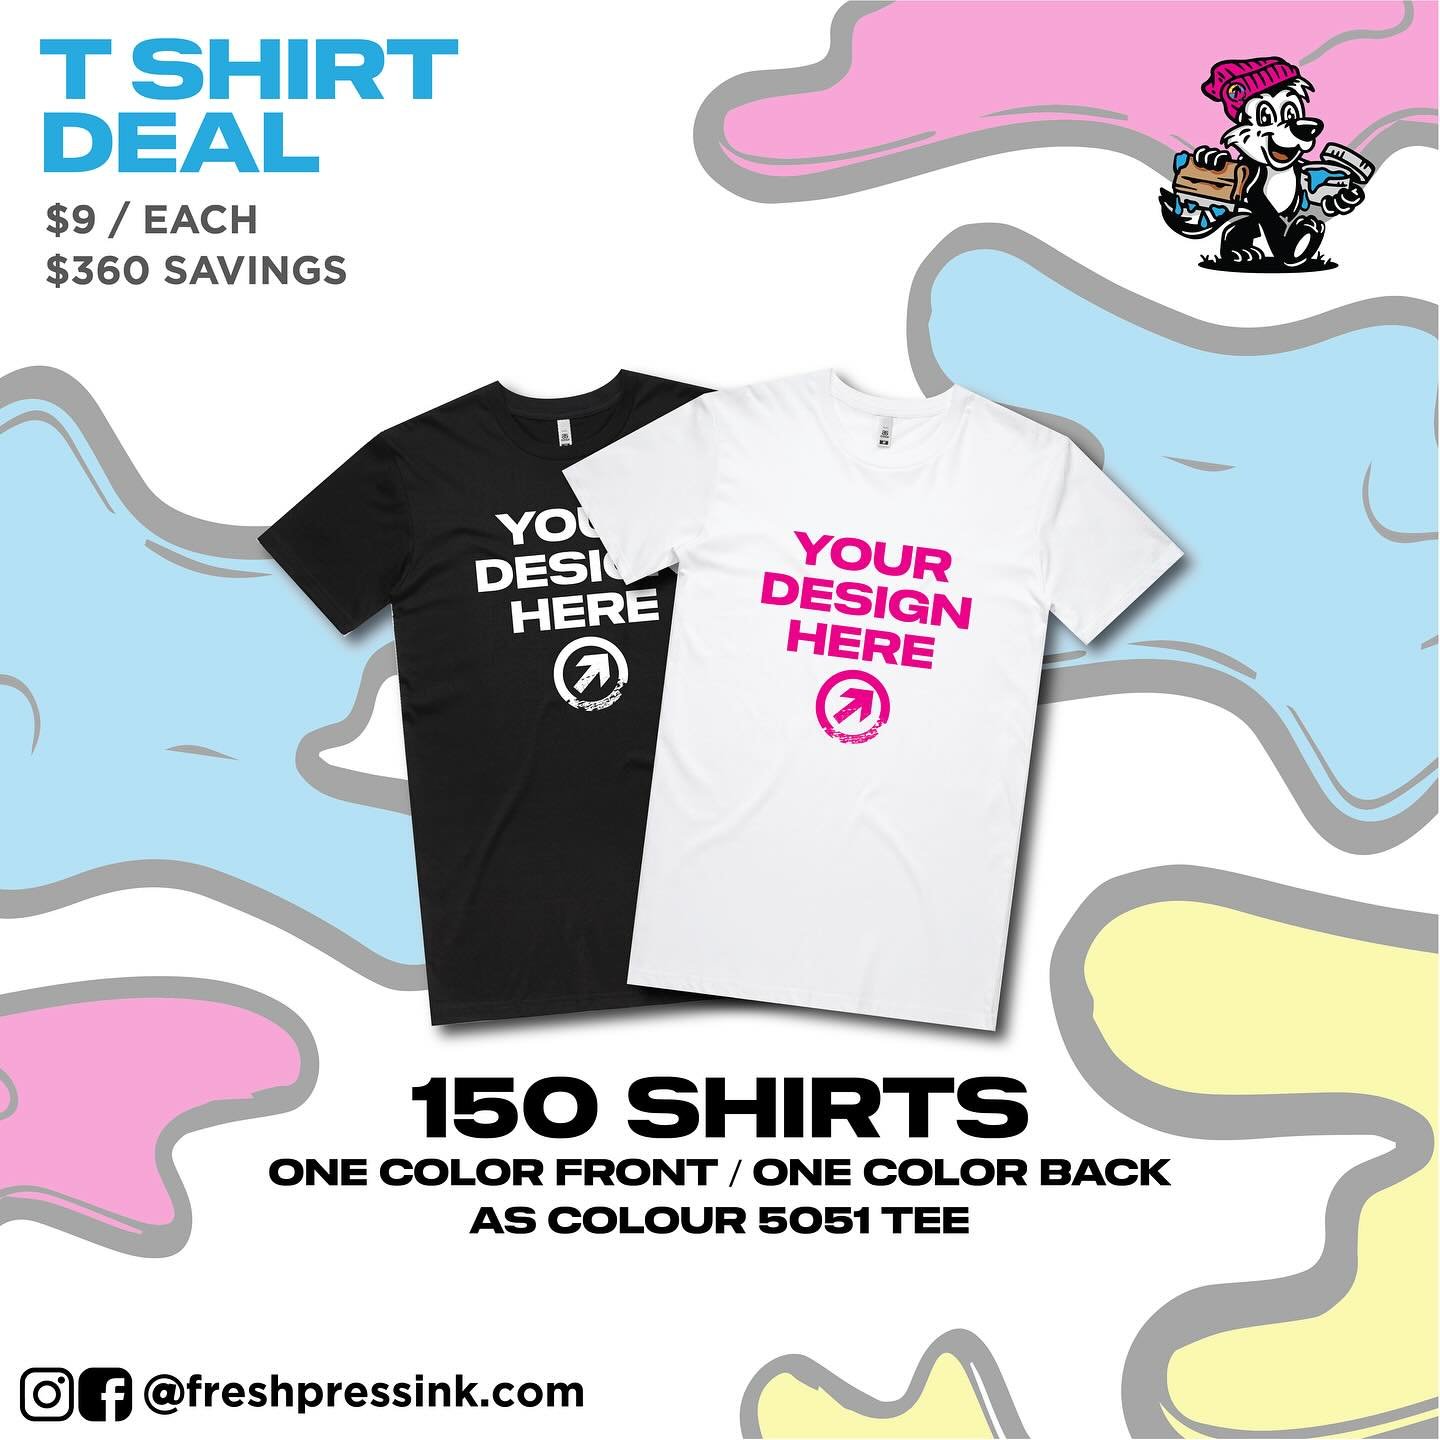 Spring into style with our fresh t-shirt deals! We&rsquo;d love to collaborate with you on your next event shirt, merch line, uniforms, etc. 

Don&rsquo;t miss this deal that includes 150 shirts, one color front and no setup fees for $9 a shirt! 

Th